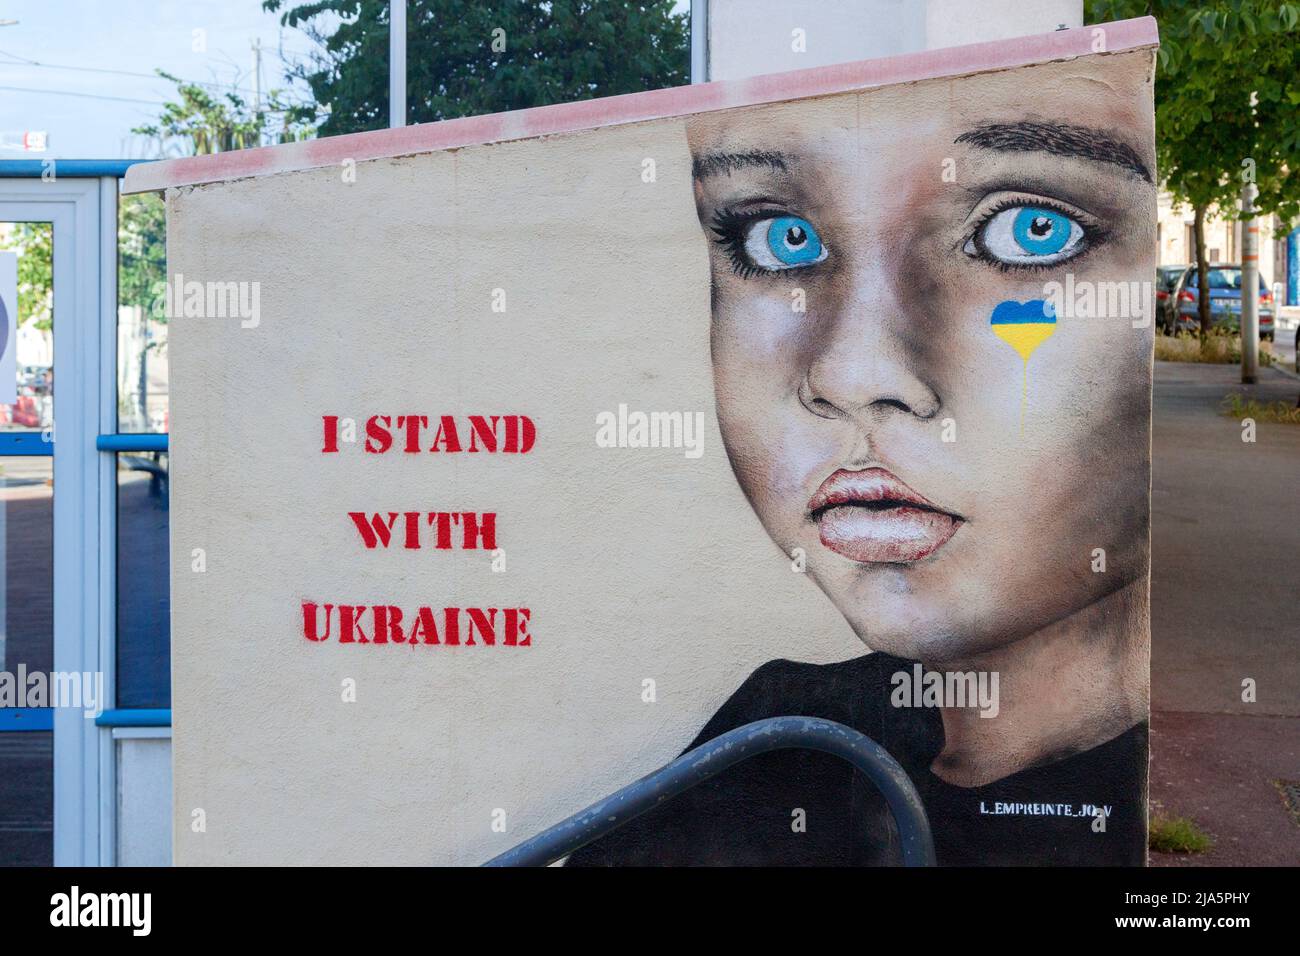 Graffiti by L empreinte jo v on a wall in support of Ukraine being invaded by the Russian army in Montpellier. Occitanie, France Stock Photo